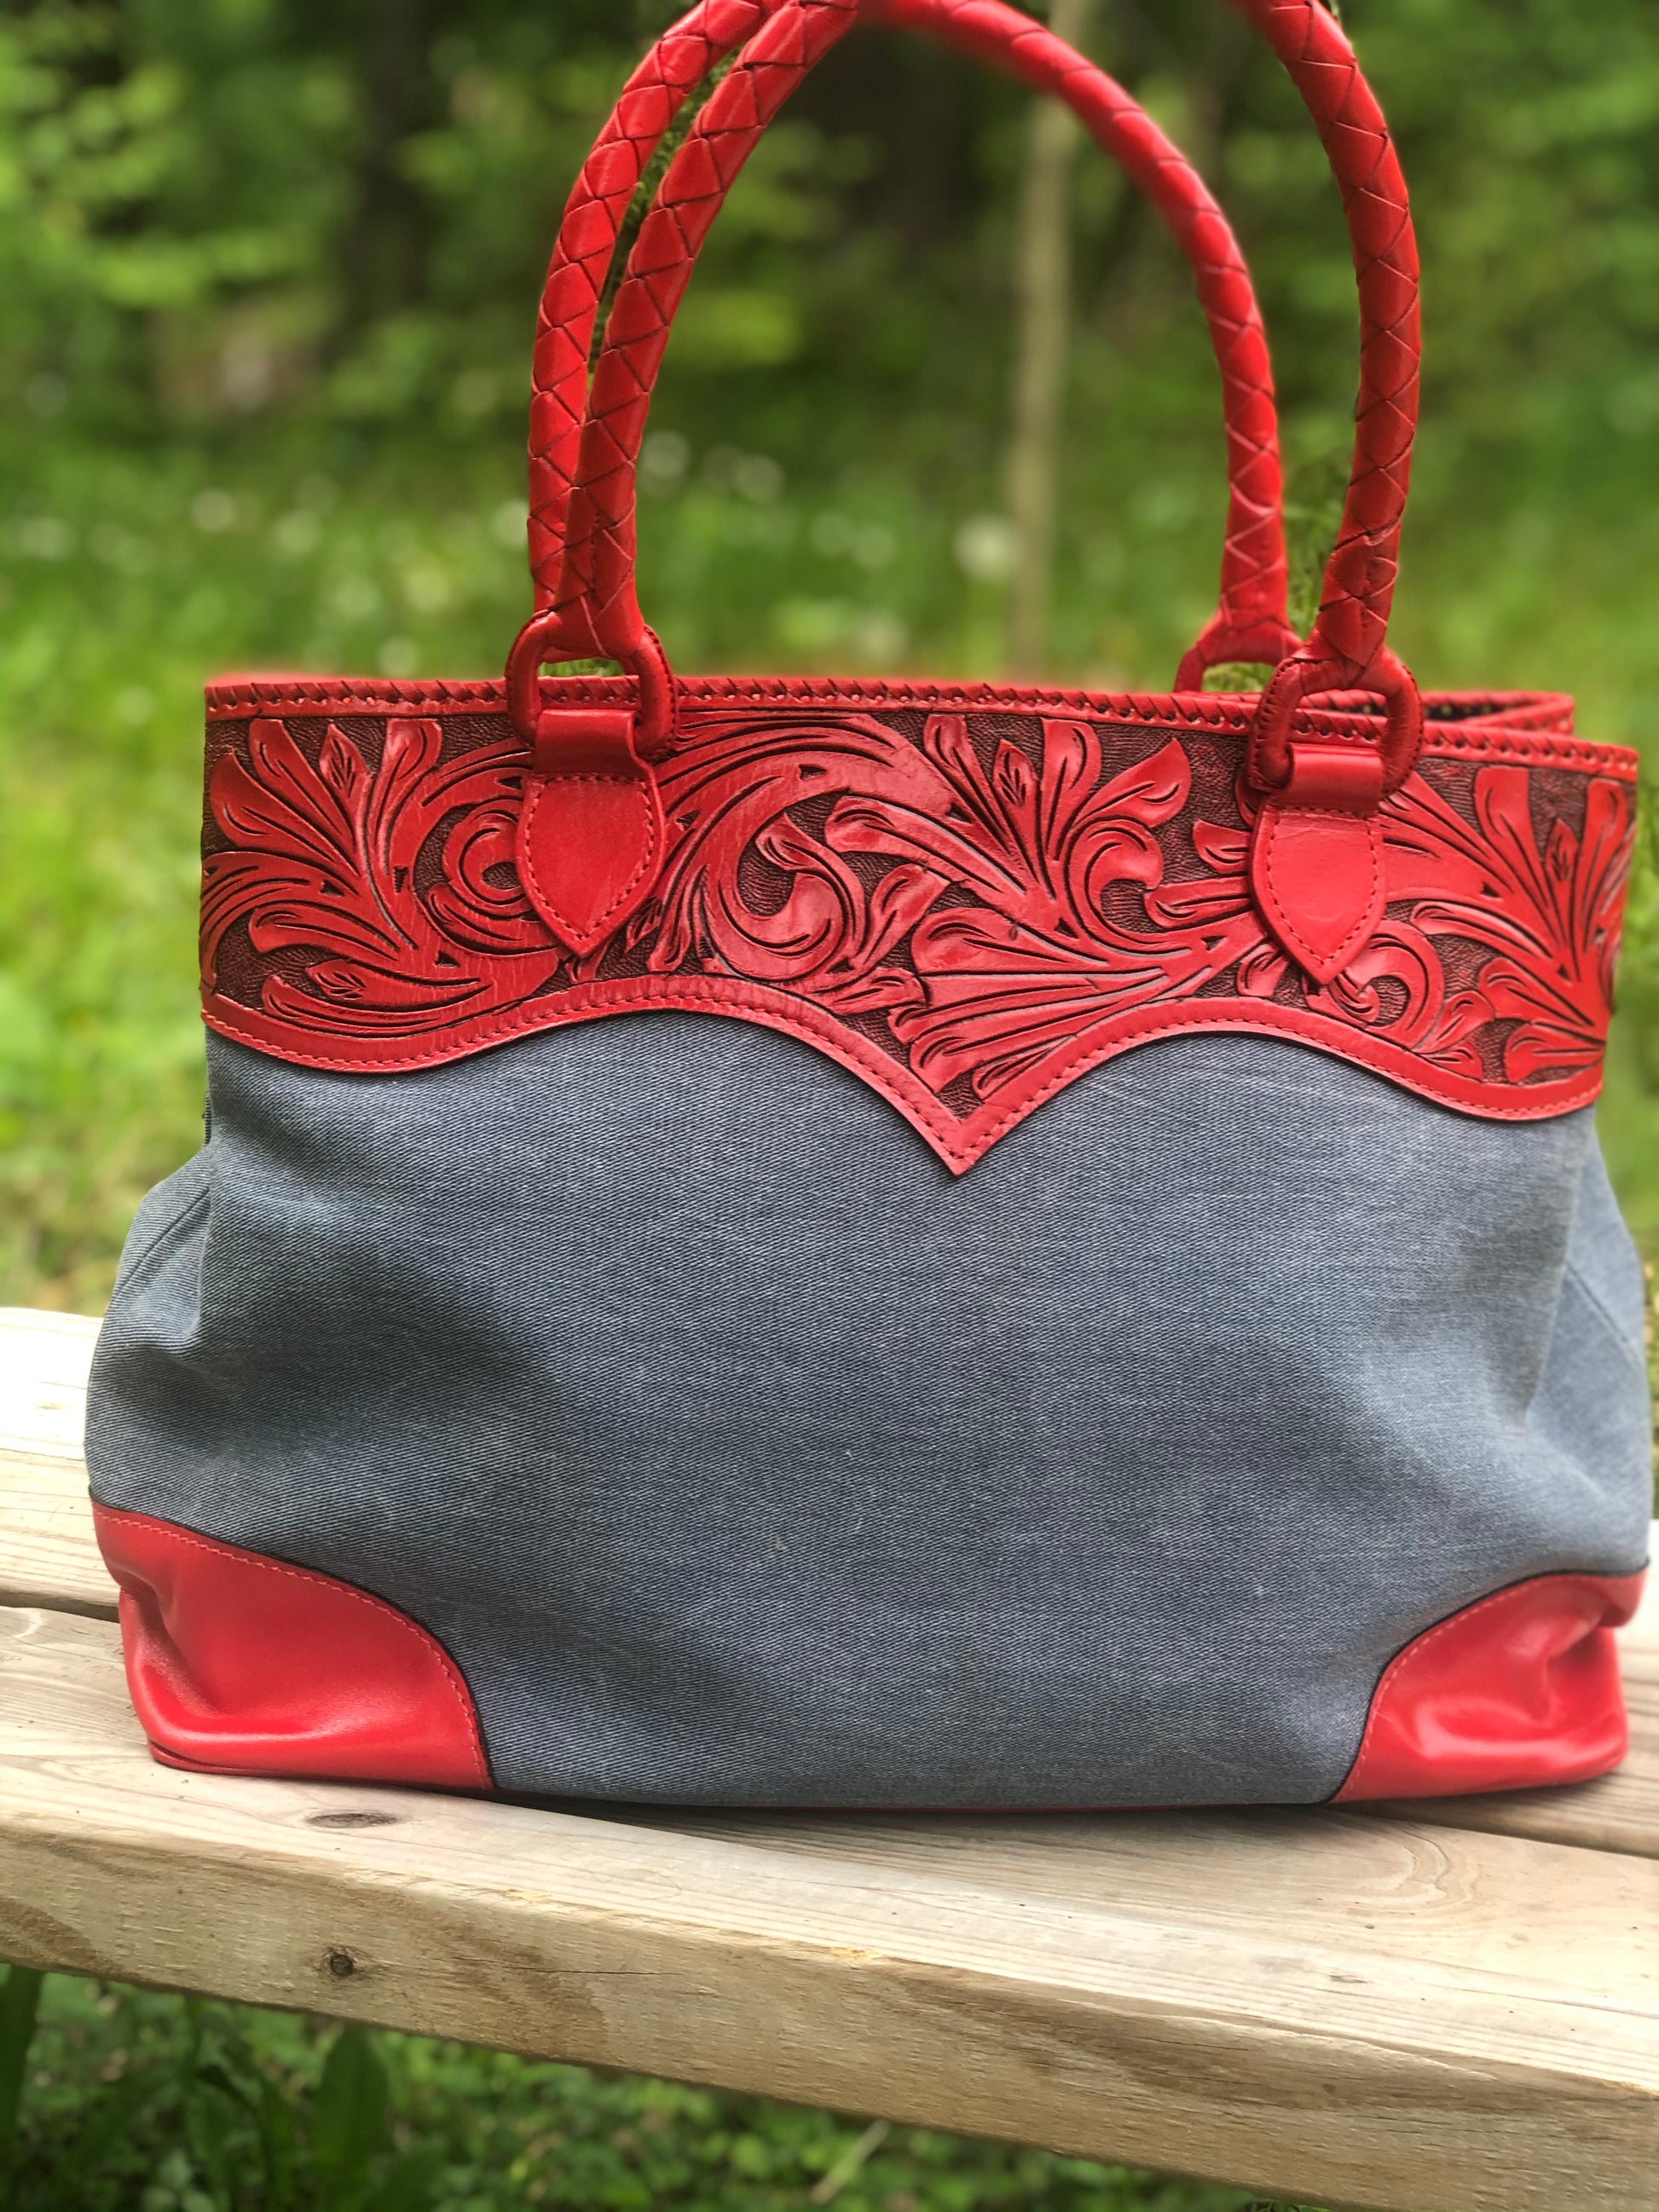 Hand-Tooled Leather & Denim Tote "Denim" by ALLE more Color - ALLE Handbags